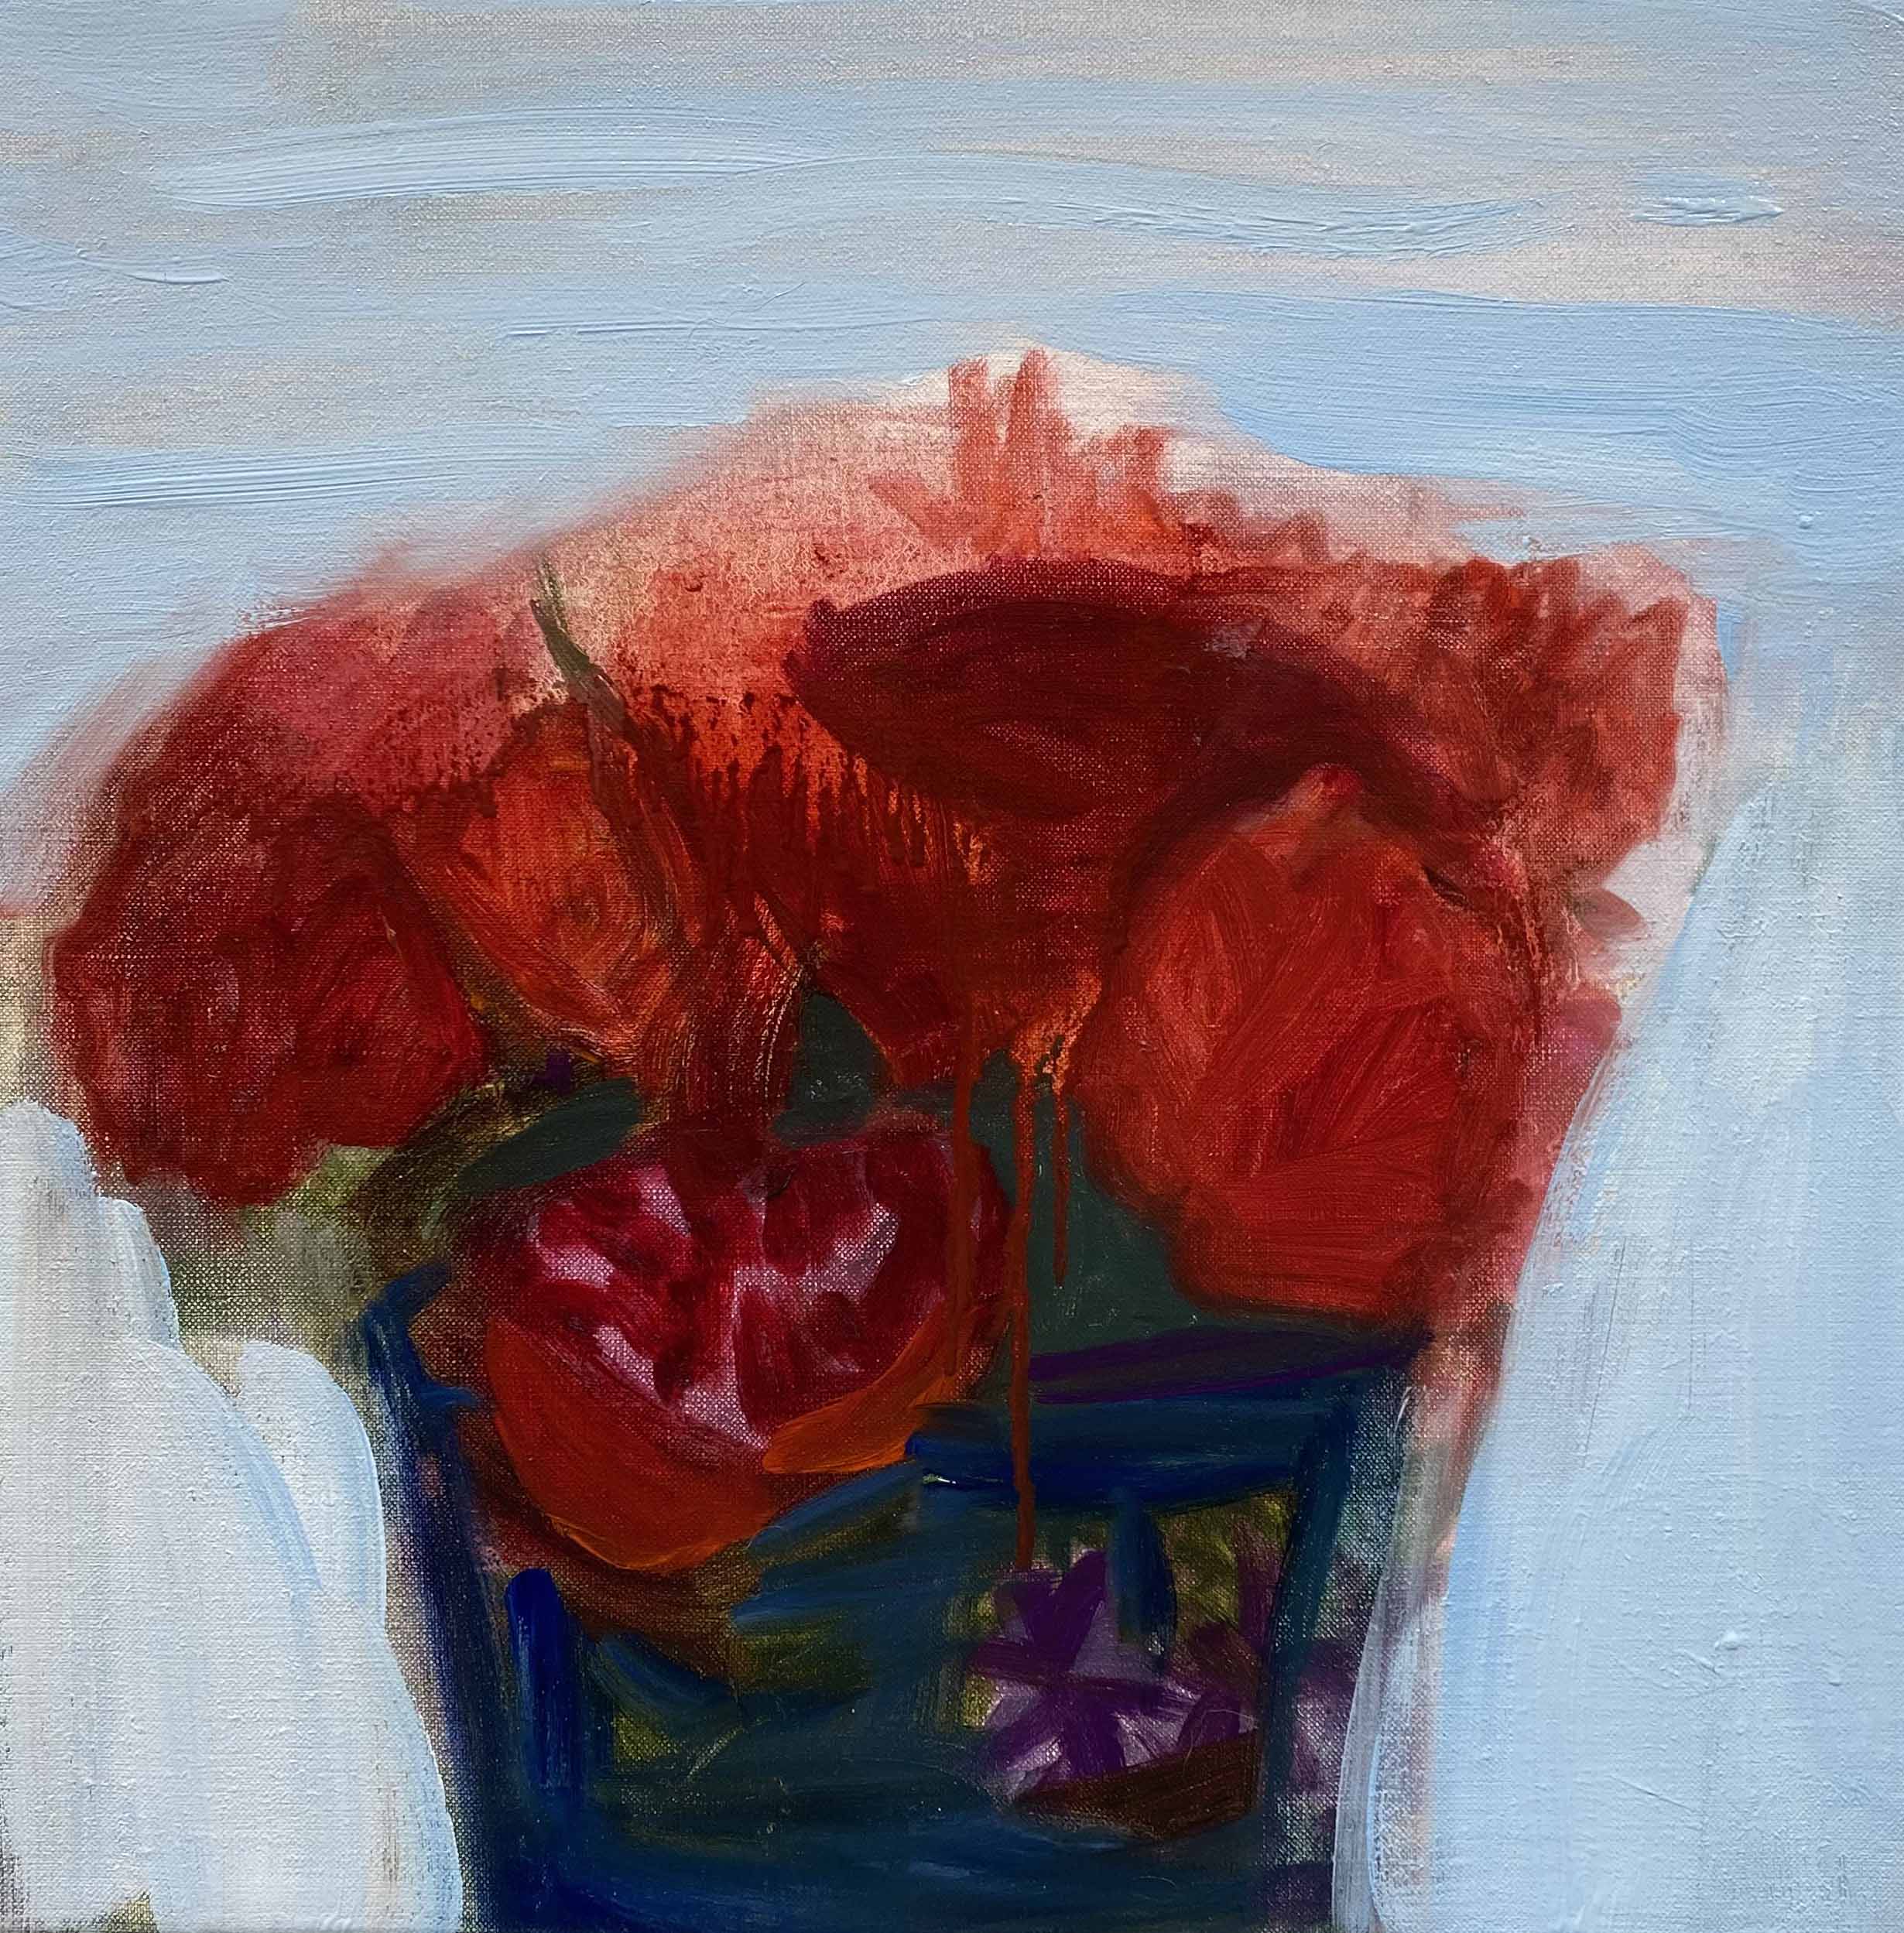 Eileen Gillespie, Flowers For Three, 2021, oil on linen, 20 x 20 inches